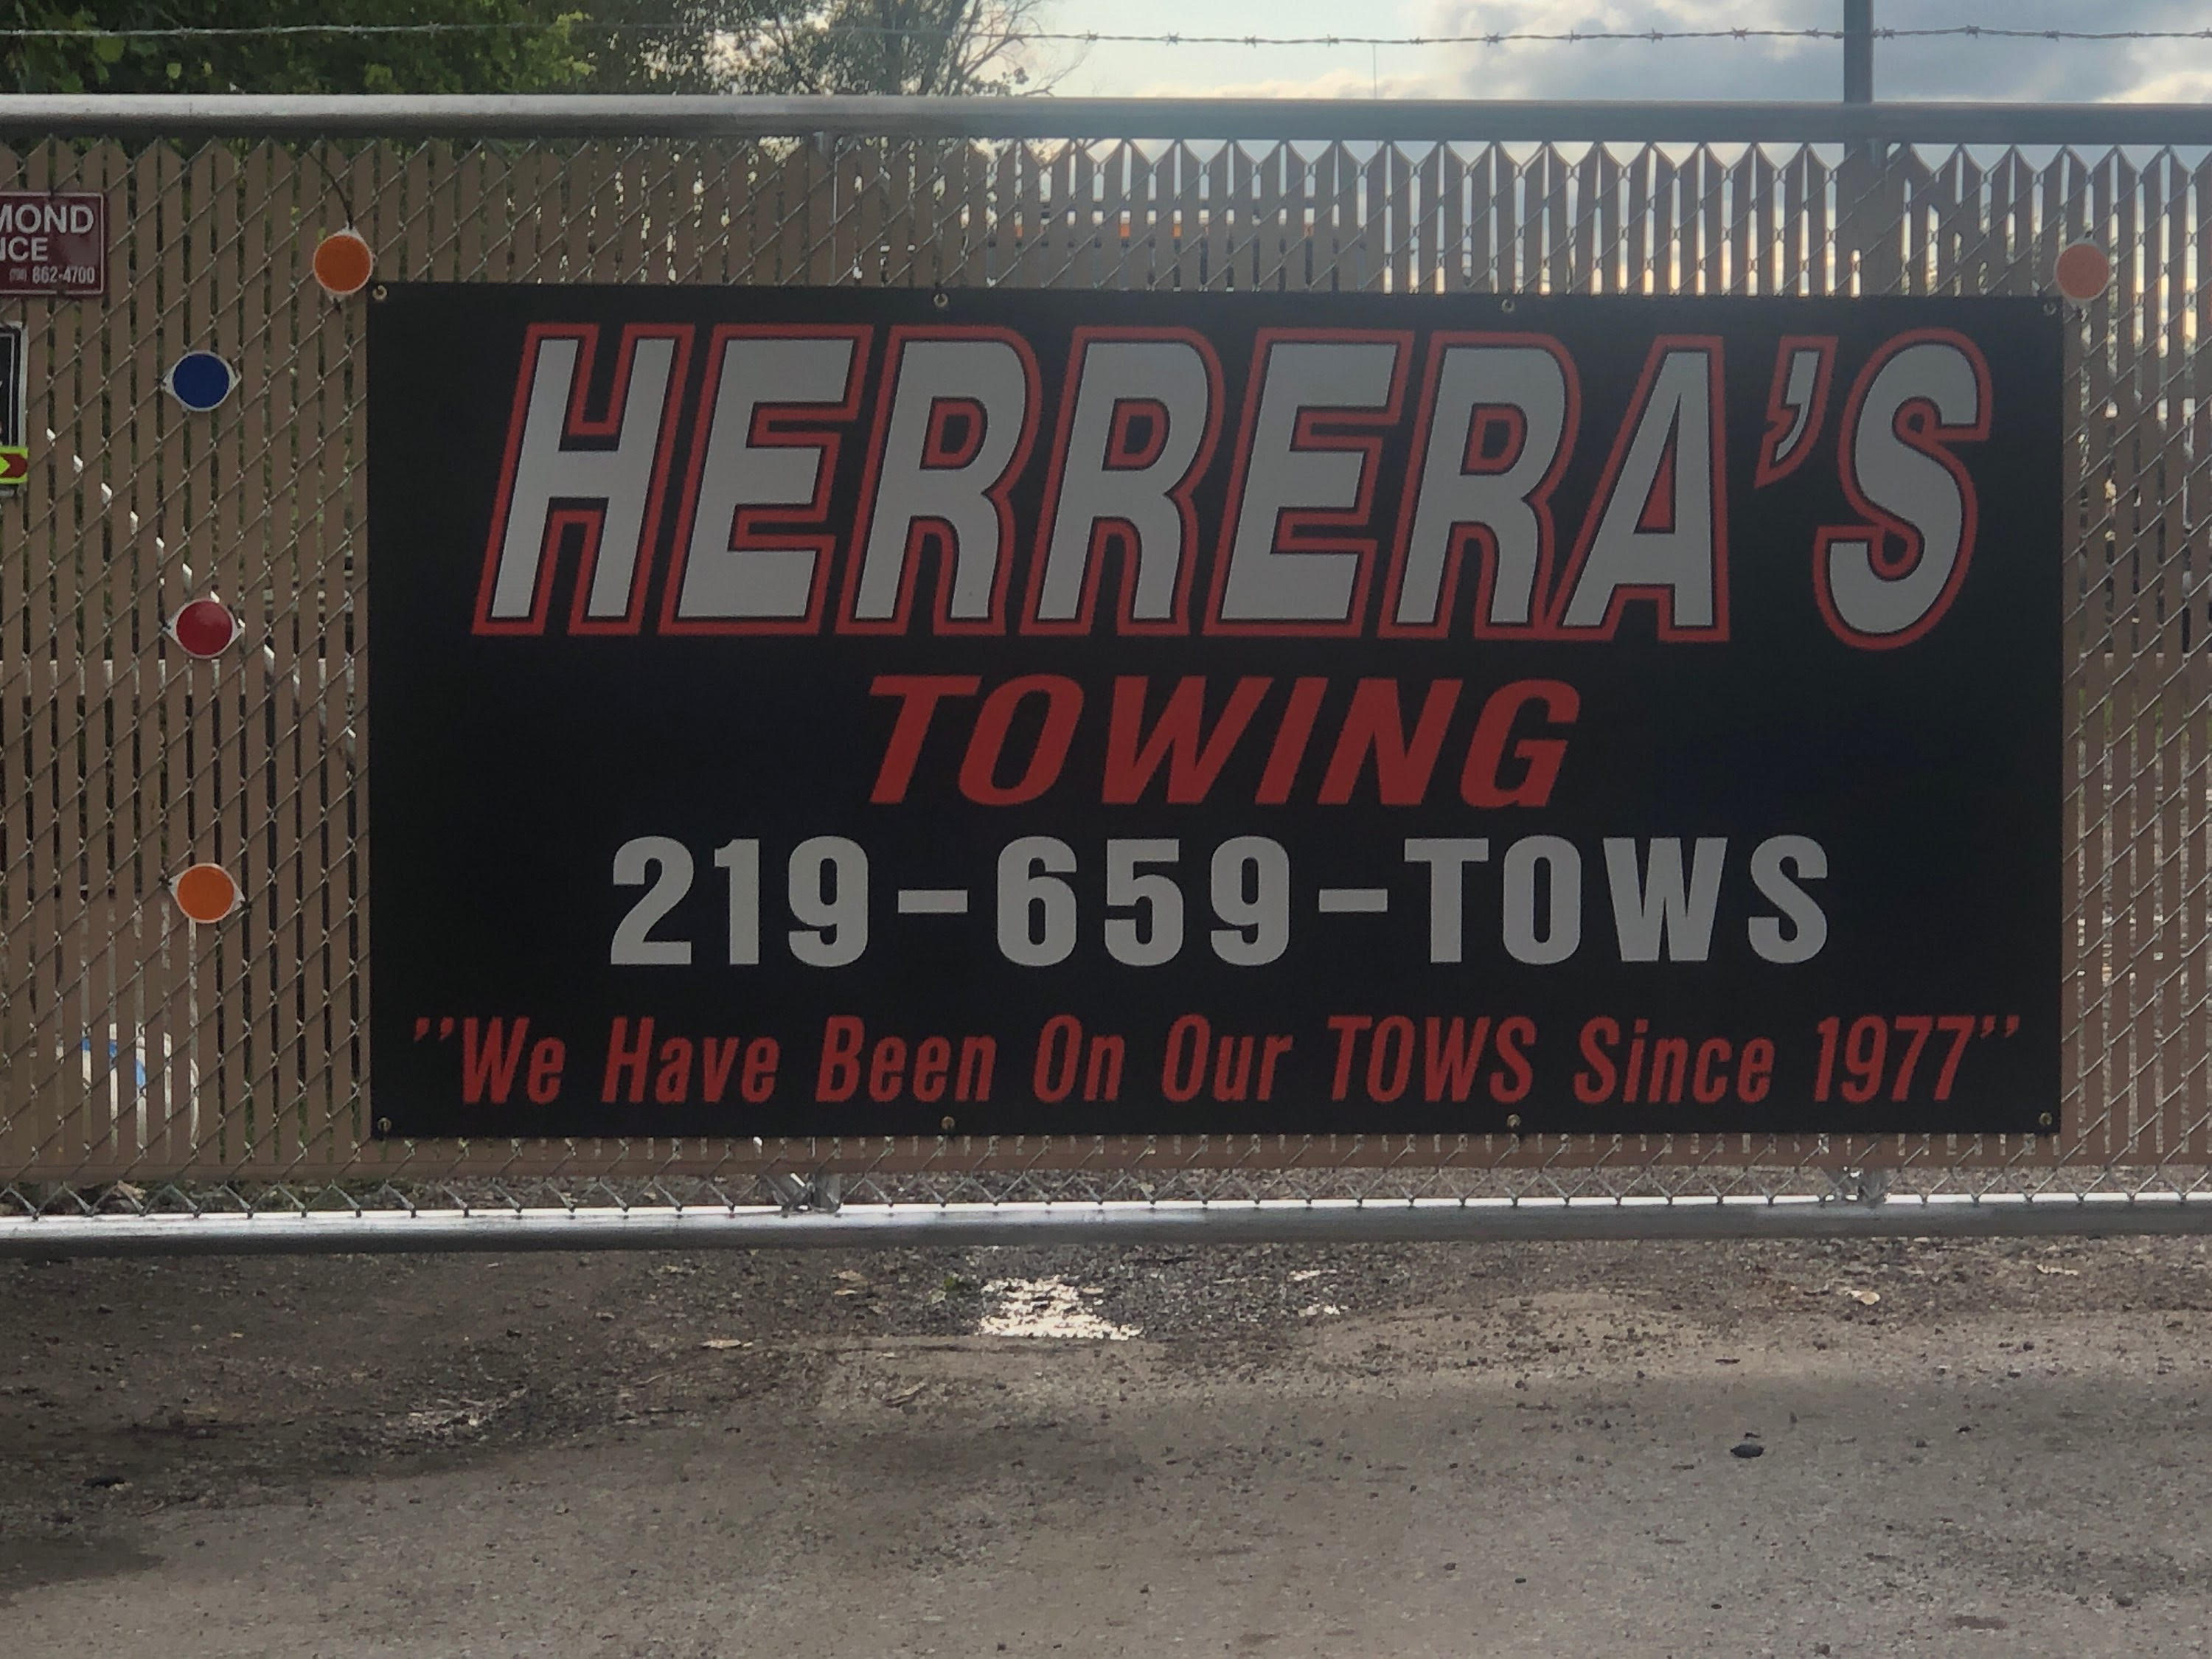 Herrera’s Towing is a comprehensive automotive emergency service provider serving northwest Indiana and the greater Chicago area. In business since 1977, we strive to provide premium towing, auto repair, and light truck repair services to our community. Our team has decades of experience working on automobiles. As “car people” before anything else, we will always afford your vehicle the same care and respect we would give to our own.

We work around the clock to make ourselves available to you whenever you may need it, offering live dispatch 24/7. We specialize in light-to-medium-duty towing and can perform all sorts of repairs on most makes and models. Our experts aren’t just licensed and highly trained—they’re also kind people who will give you comfort and peace of mind throughout each step of the process. Call Herrera’s Towing today to see what we can do for you!